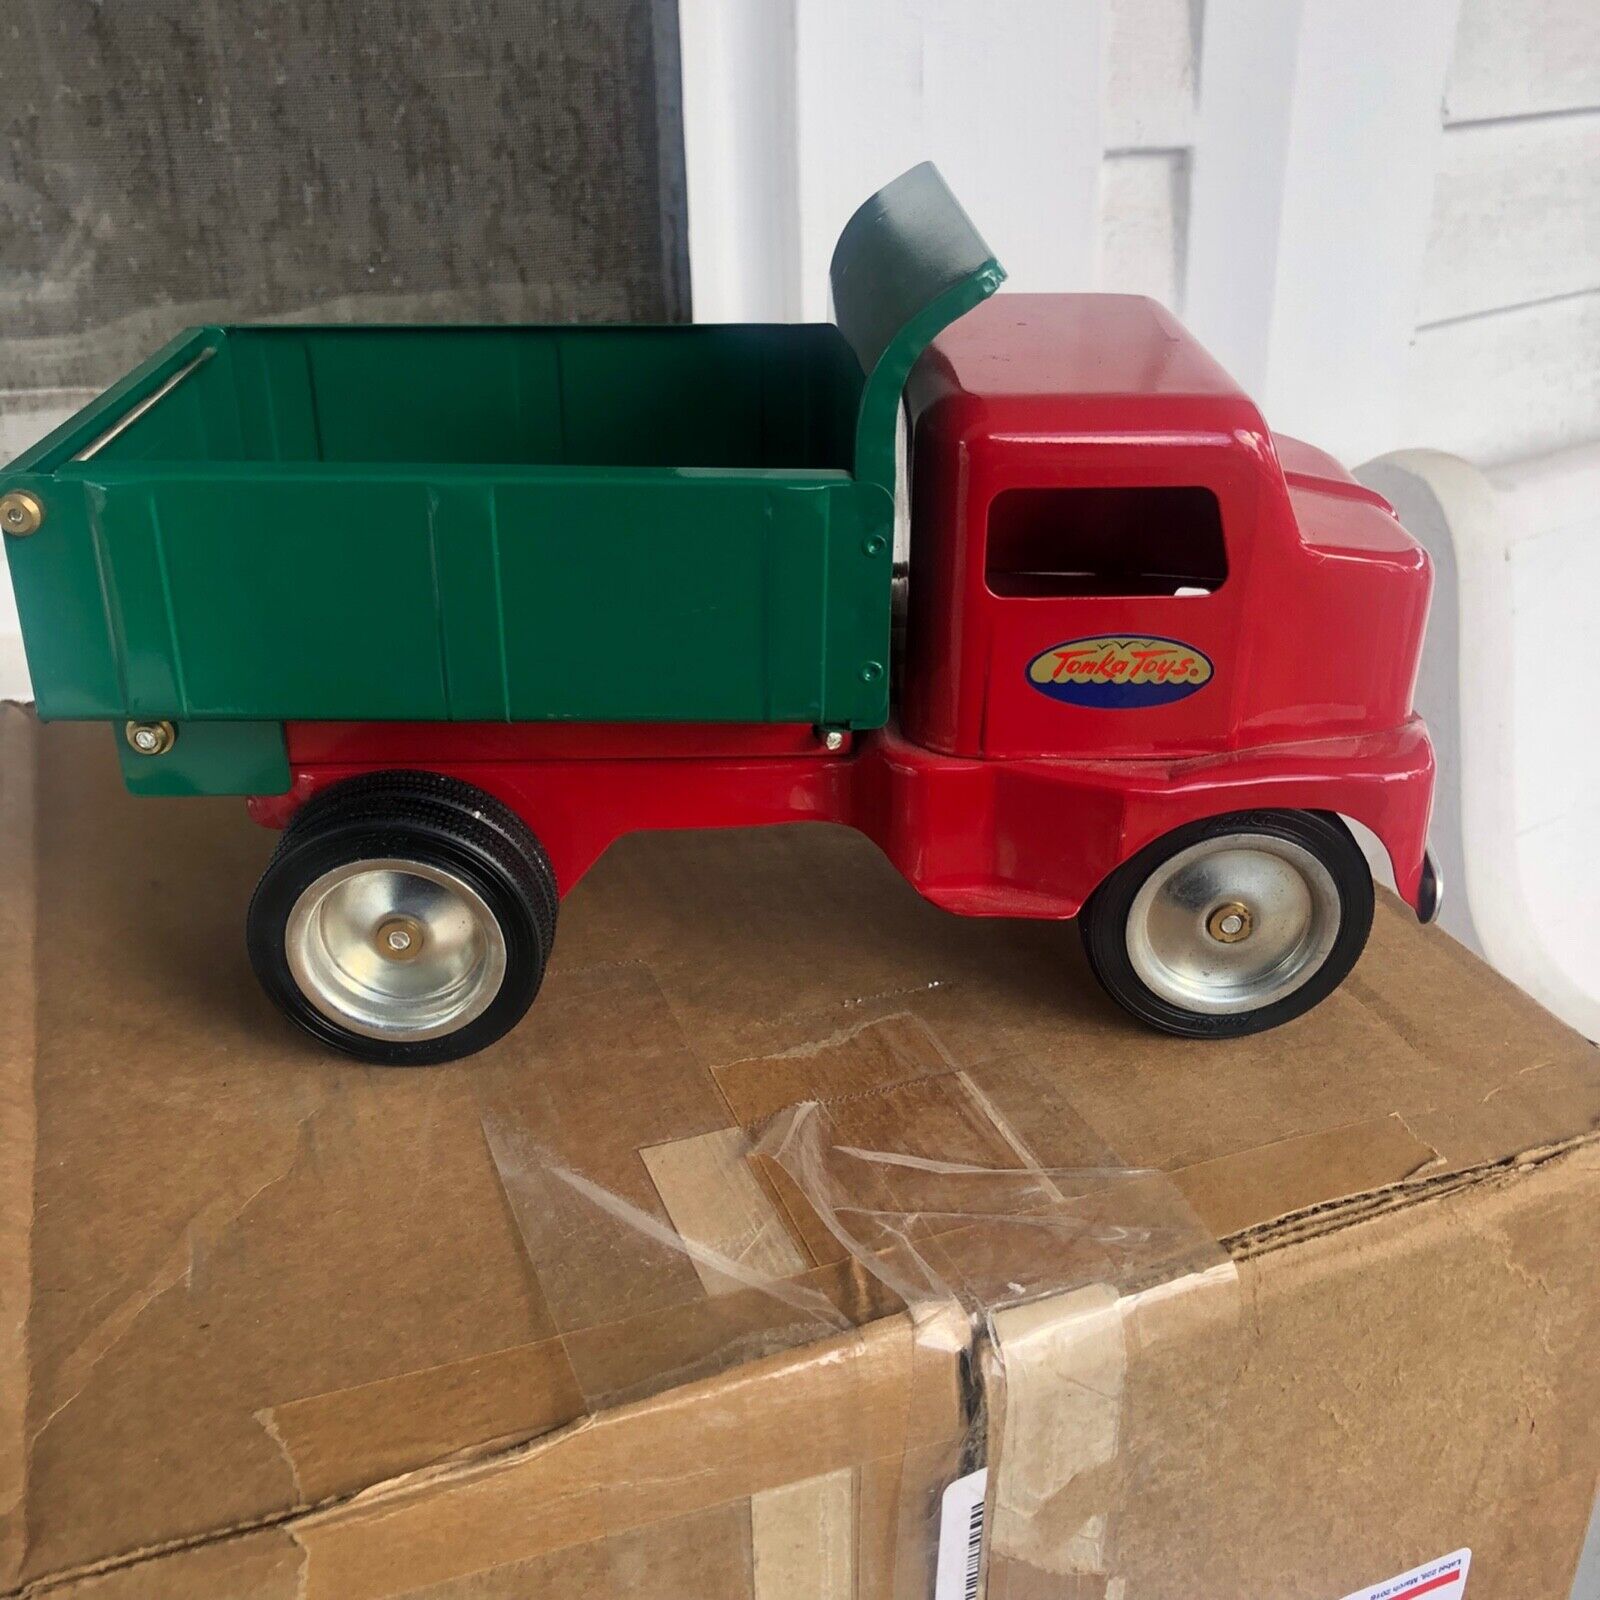 c1997 Tonka anniversary remake 1953 red and green dump truck mint condition